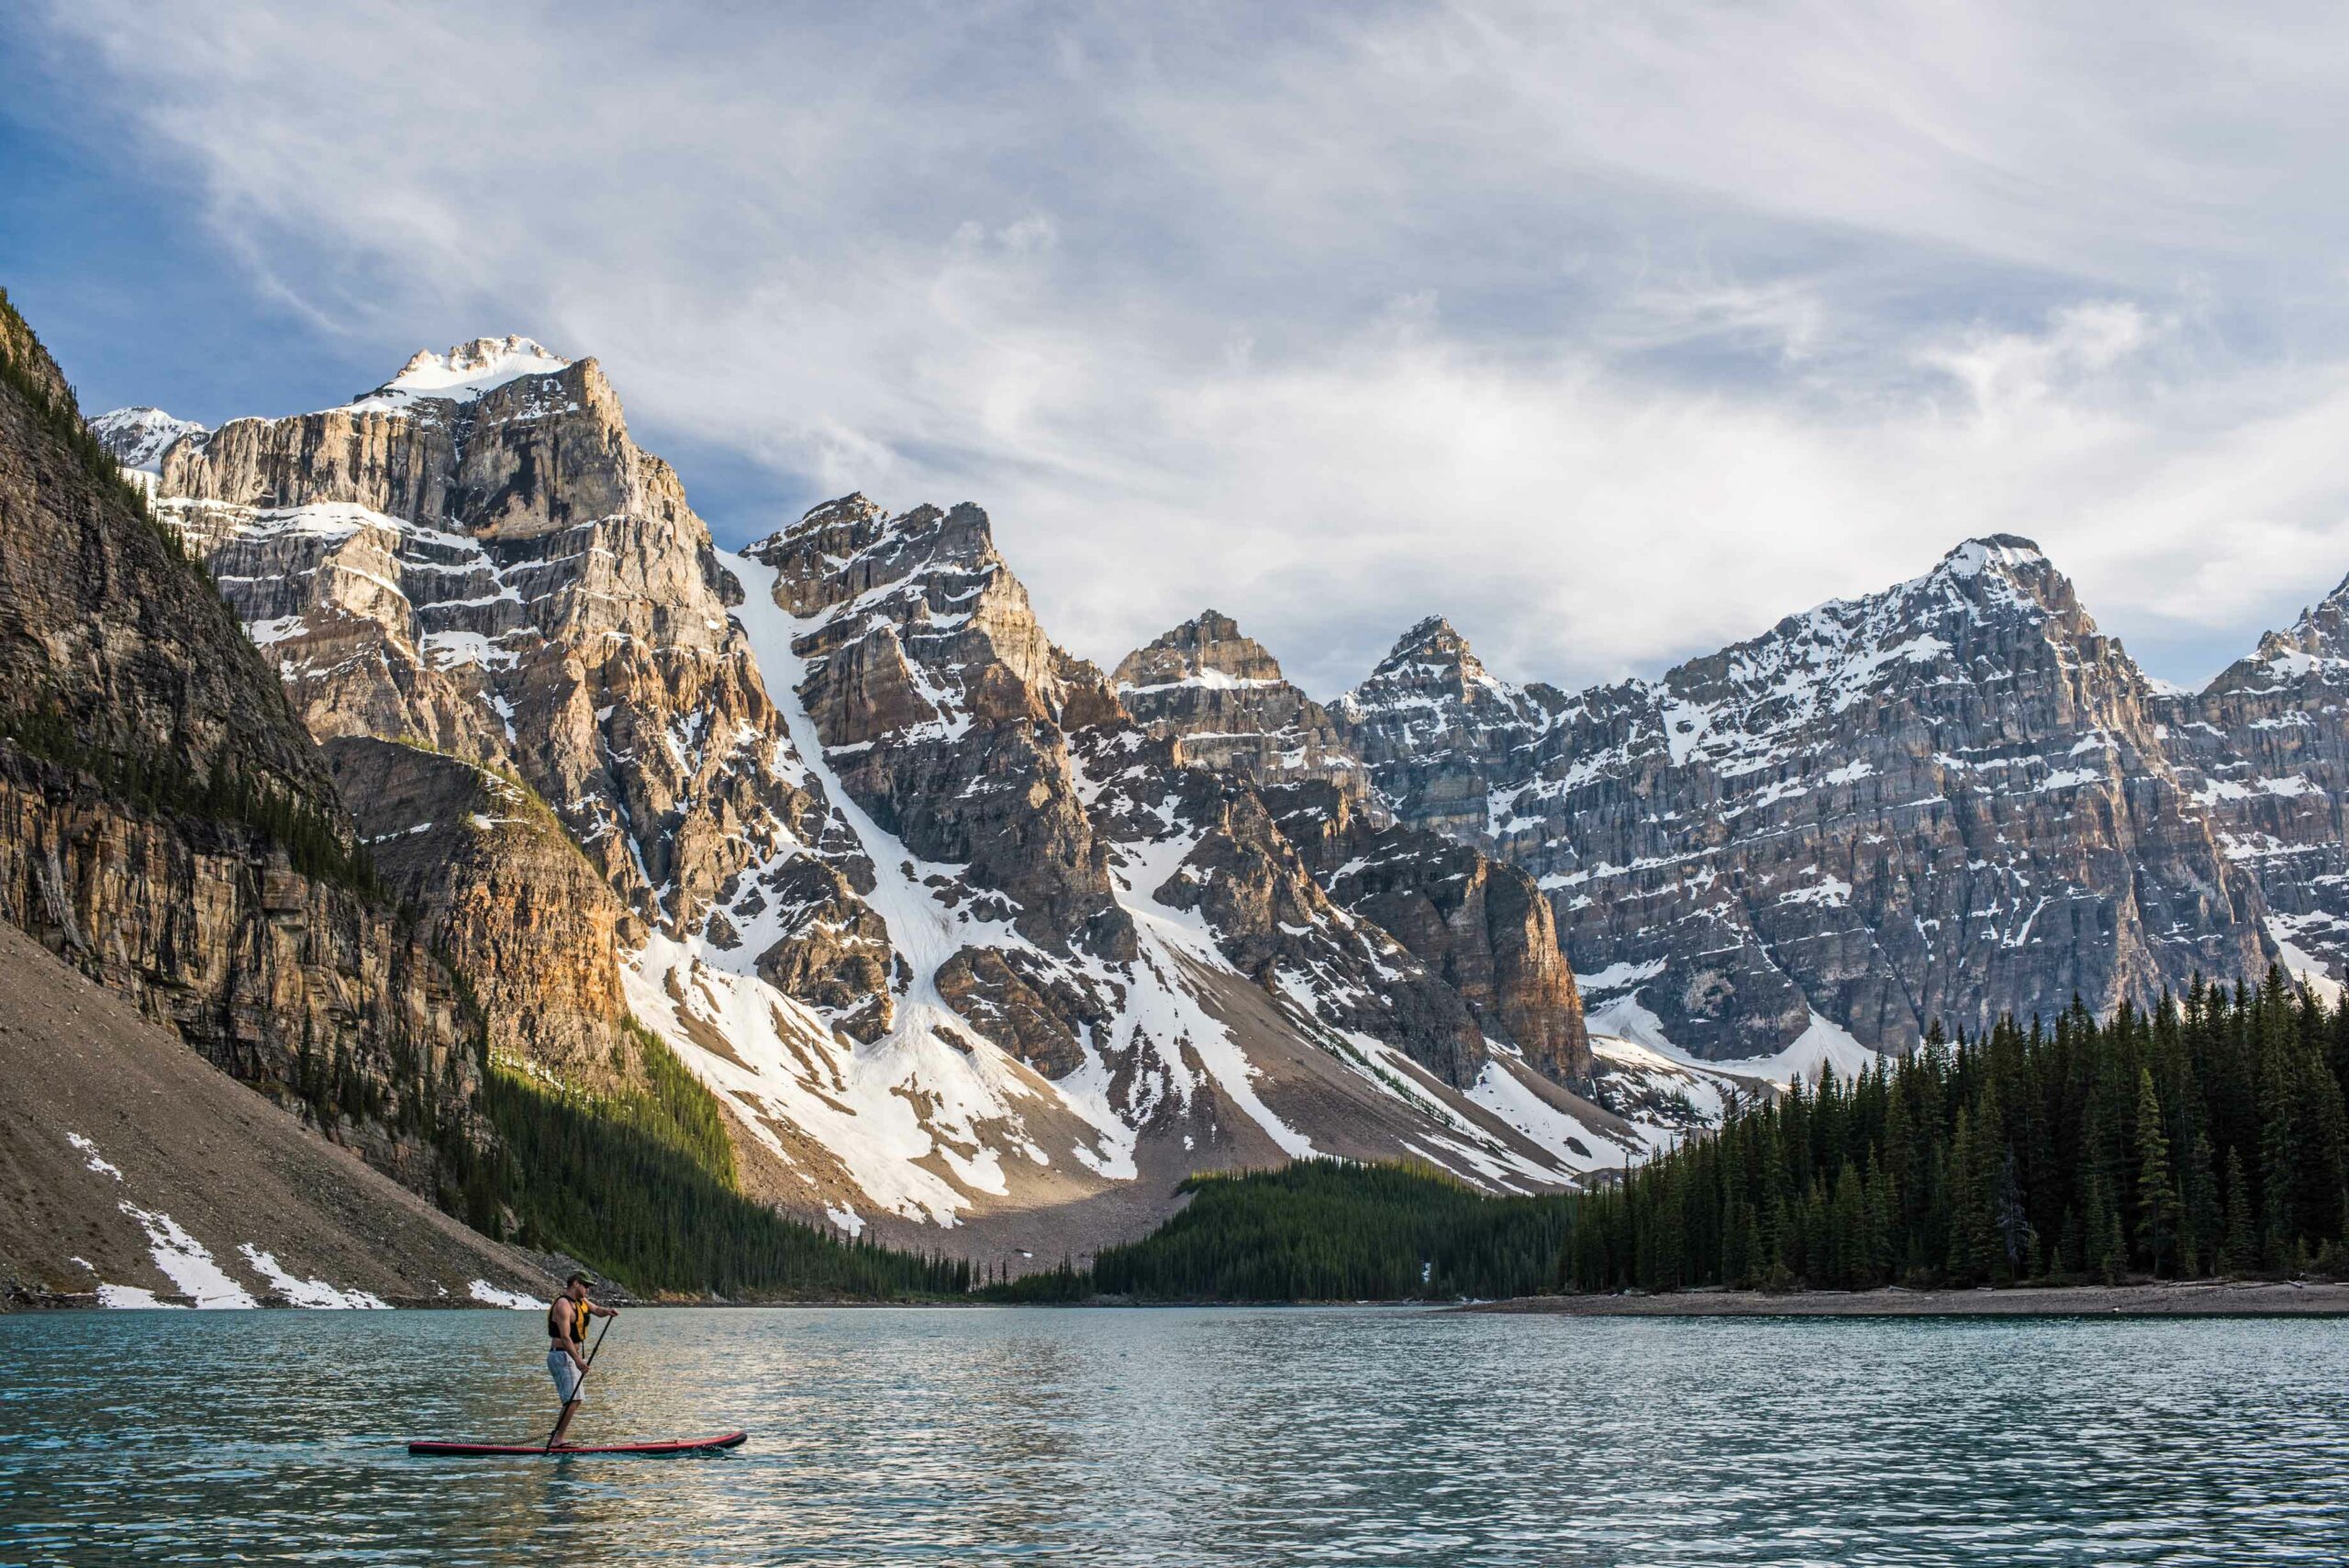 A person on a paddle board at Moraine Lake. This year, the only way to access this spot in the Canadian Rockies is by public transit. 